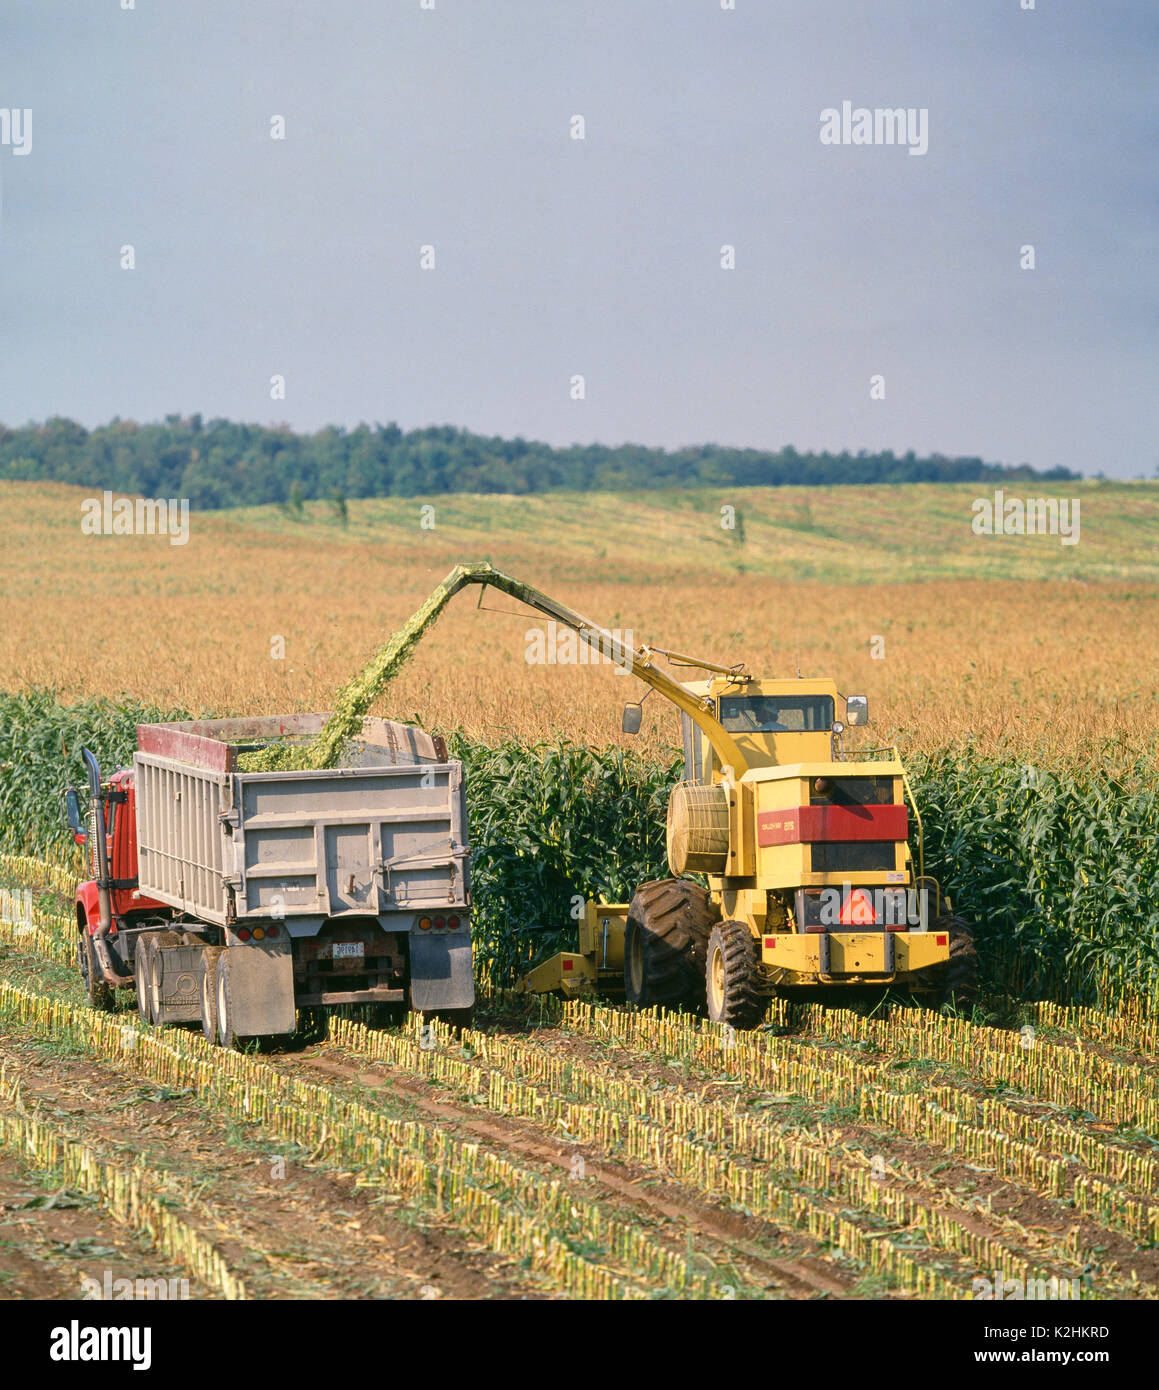 CORN SILAGE HARVEST USING 2115 NEW HOLLAND SELF-PROPELLED CHOPPER WITH GROW HEAD, BLOWING IN TO TRACTOR TRAILERS WITH DUMP TRAILERS ALONGSIDE CHOPPER Stock Photo